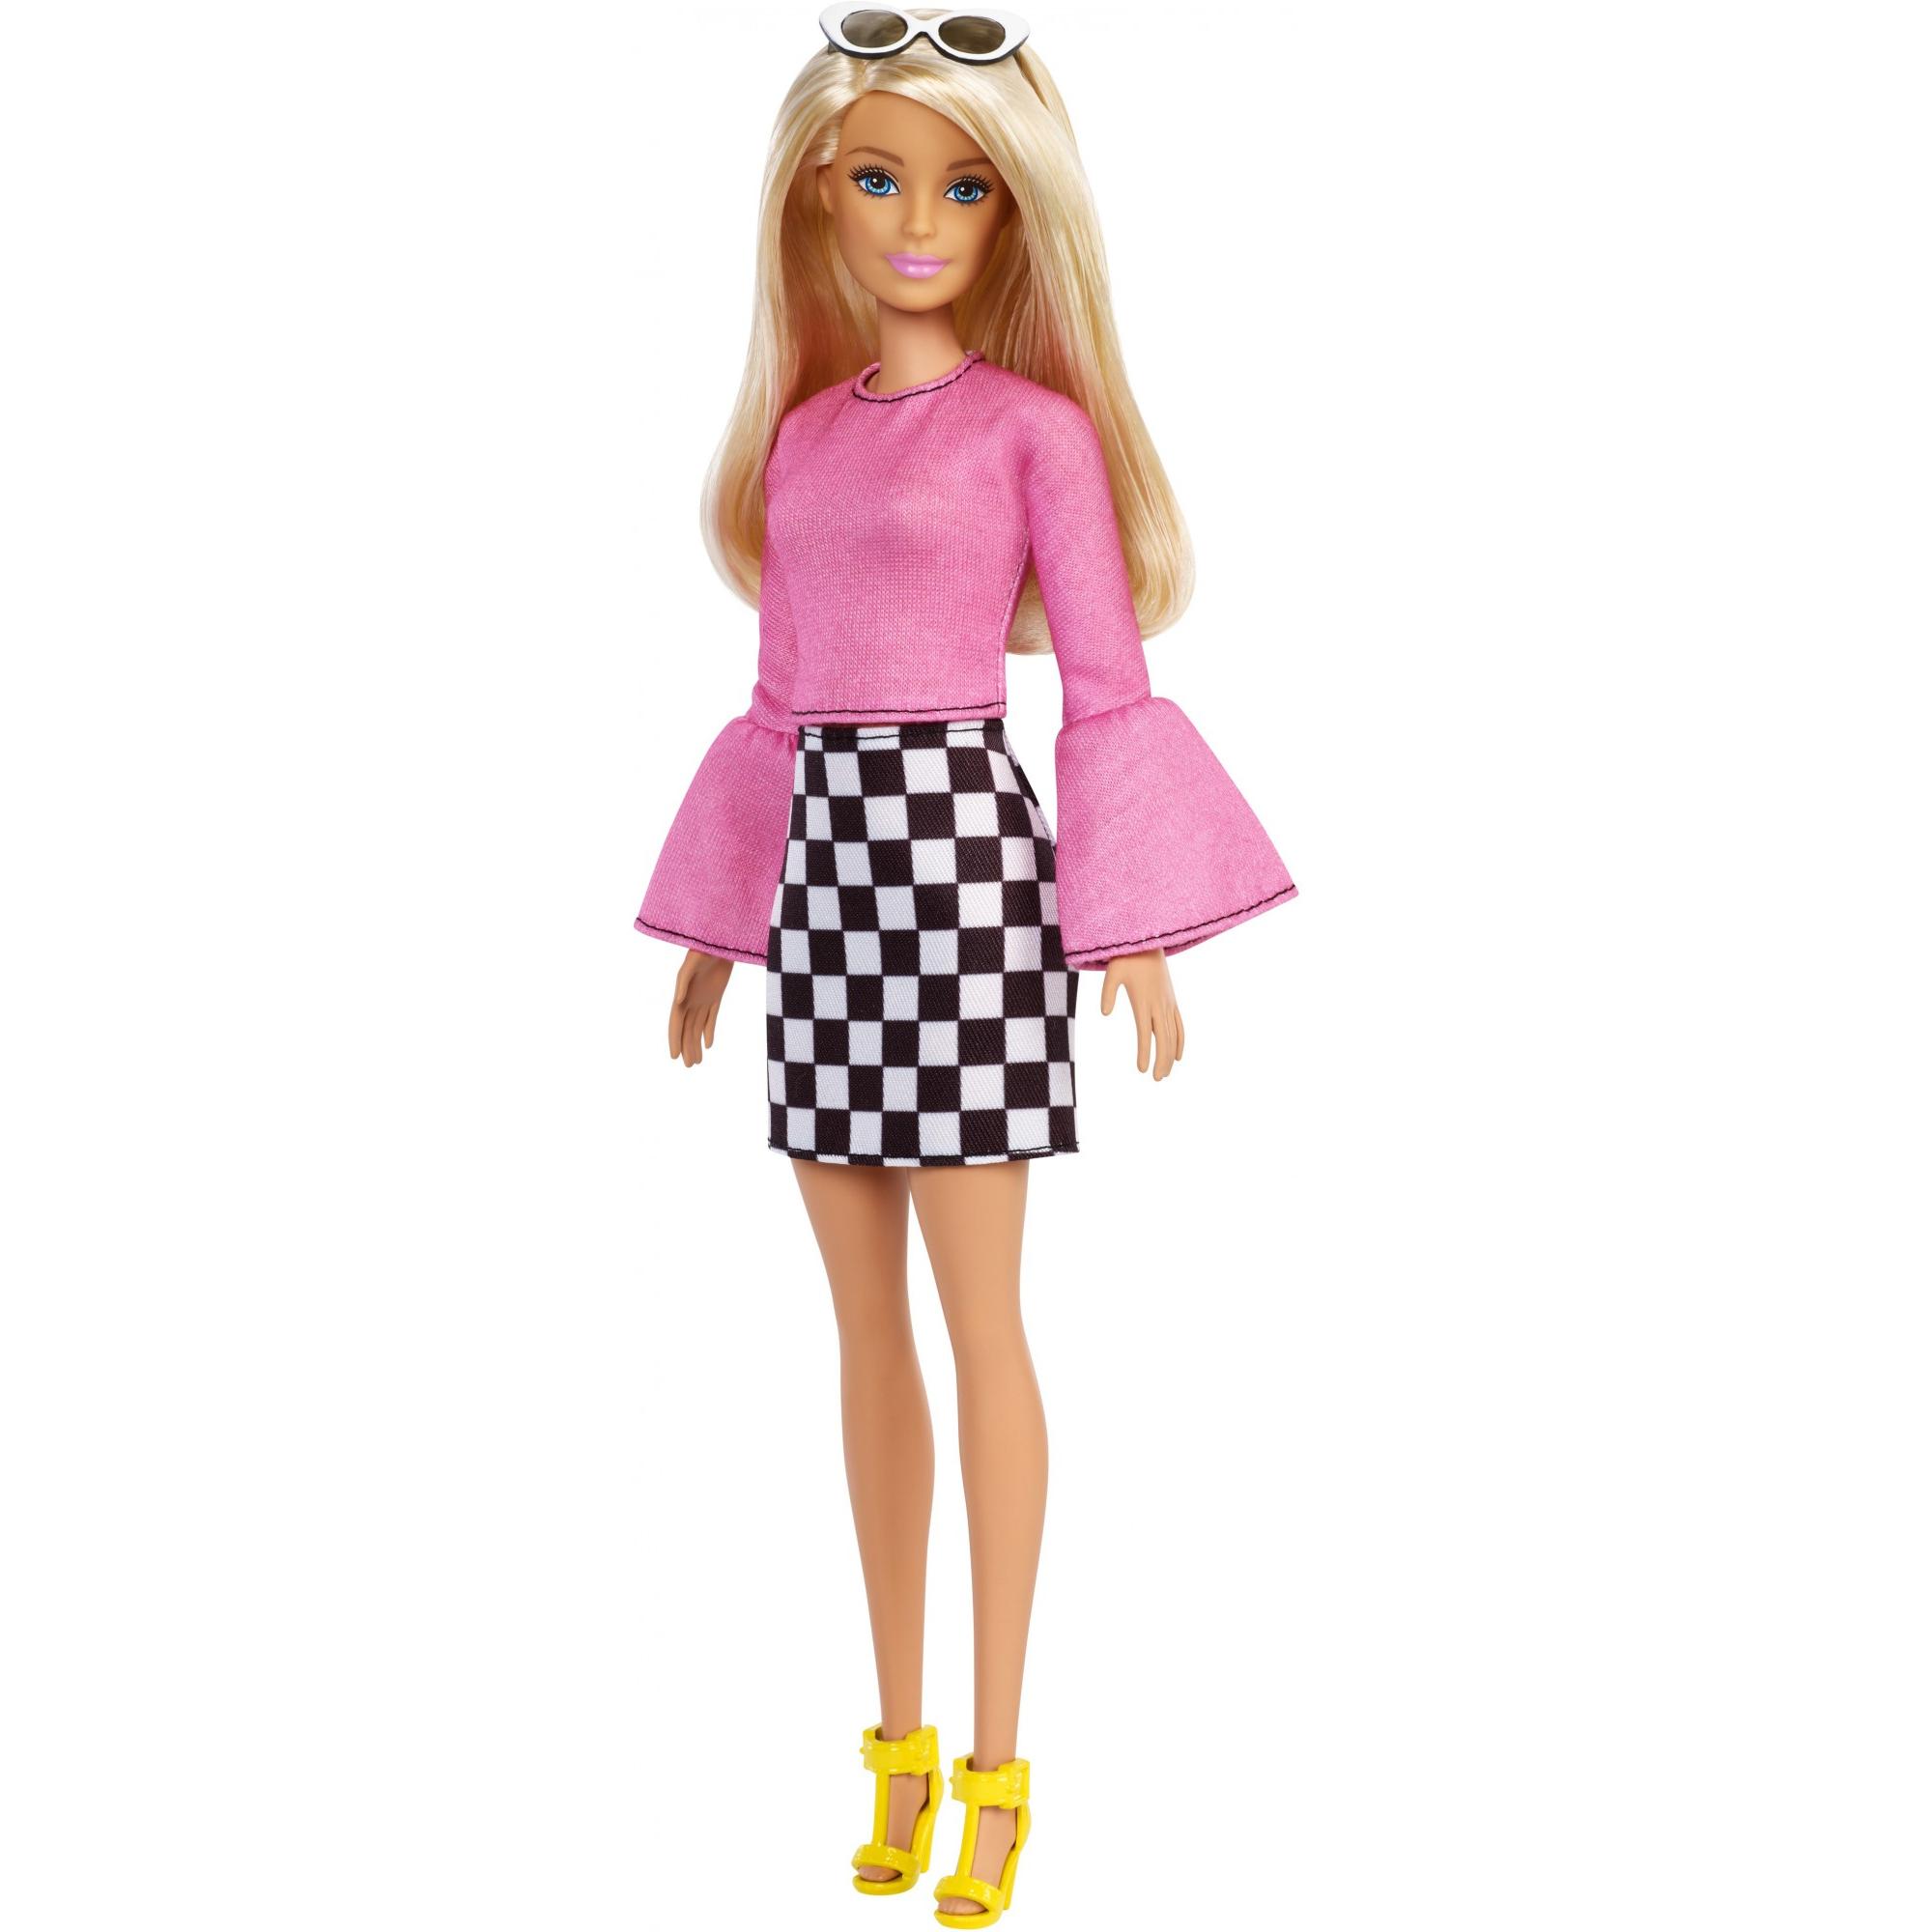 Barbie Fashionistas Doll, Original Body Type with Checkered Skirt - image 1 of 9